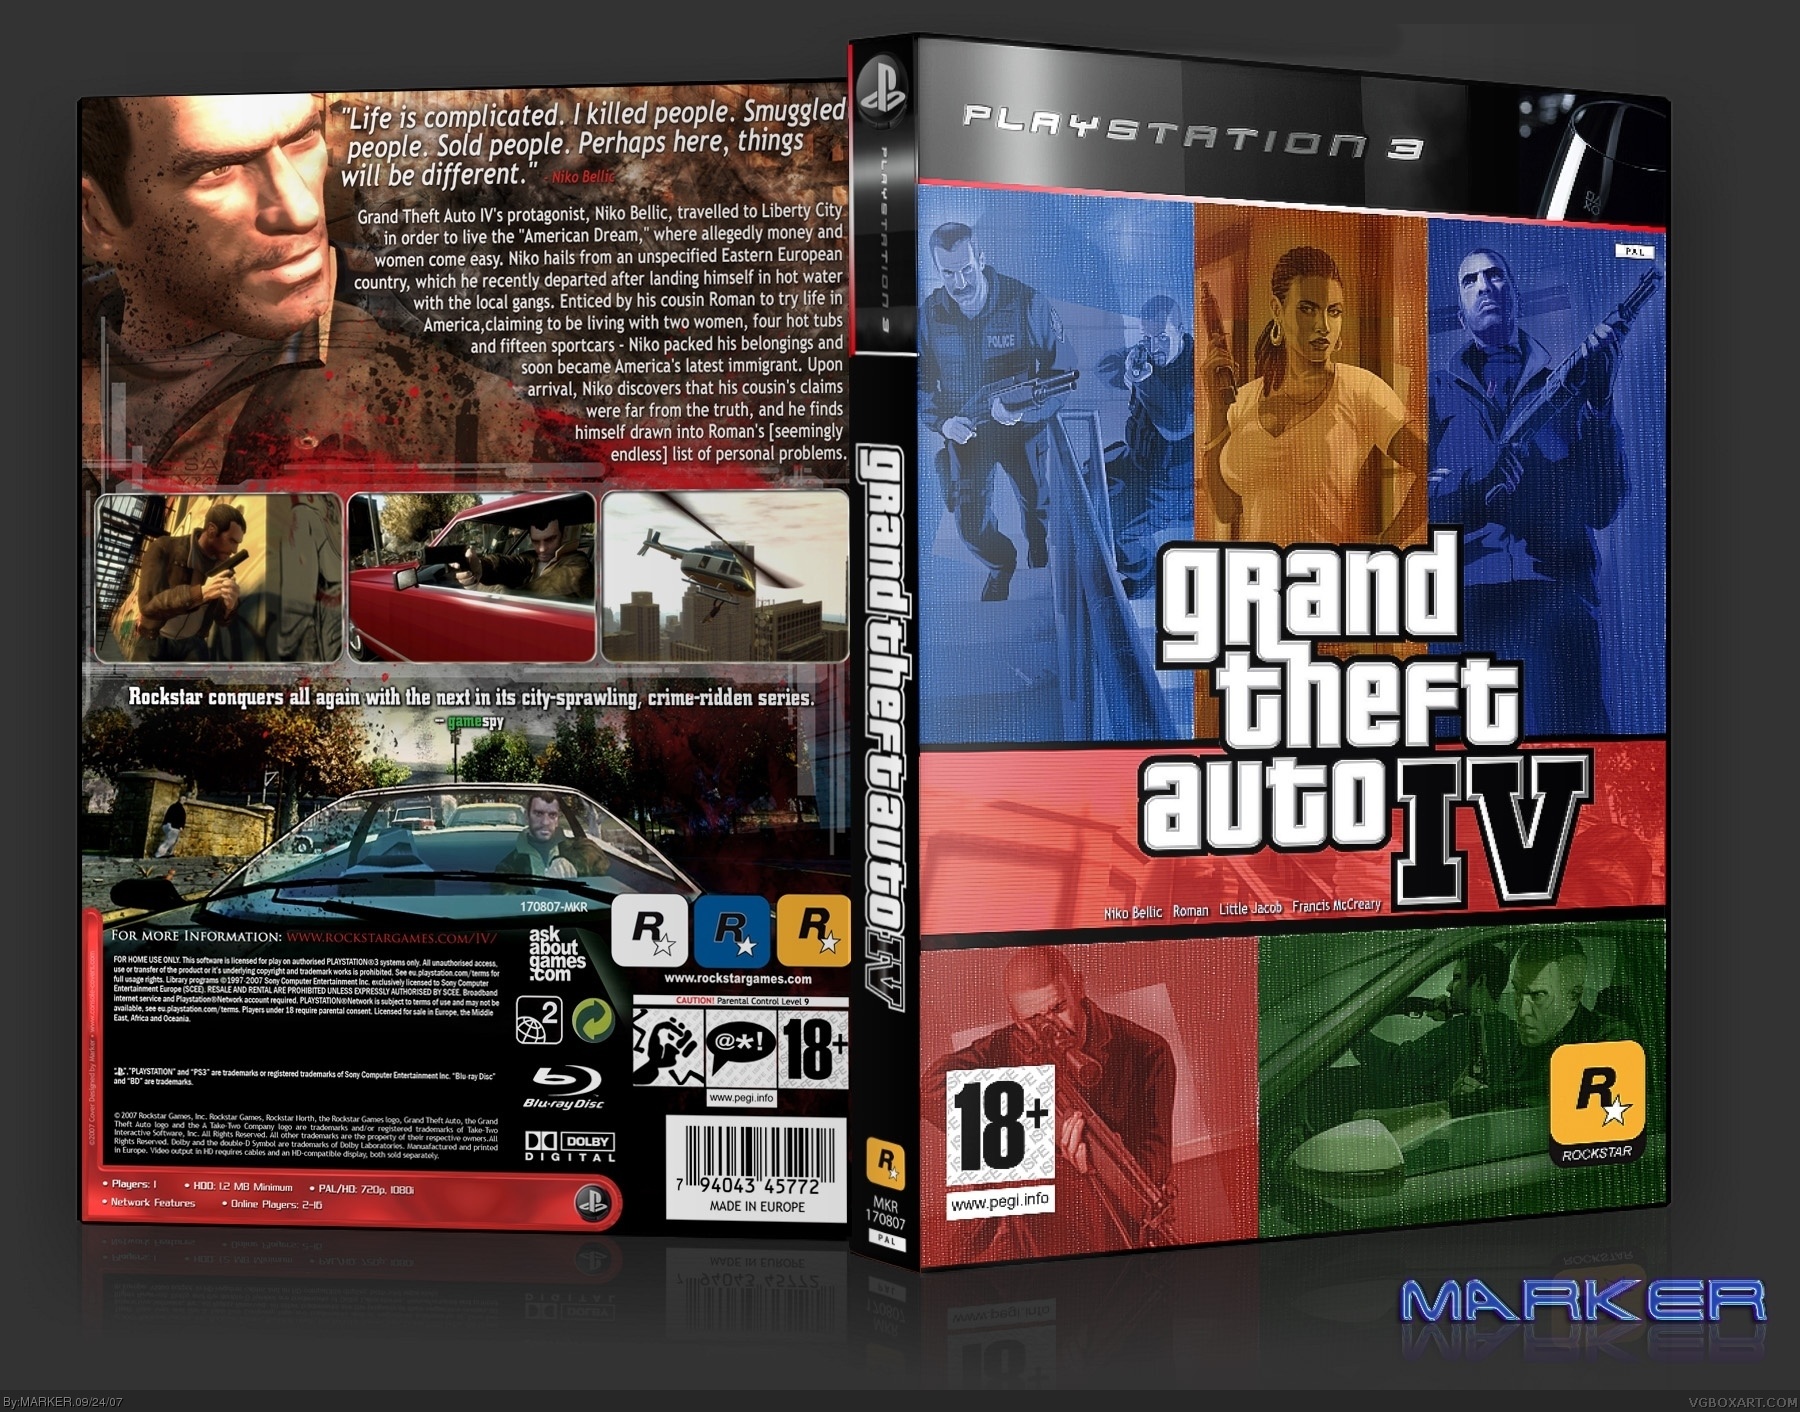 Grand Theft Auto Iv Box Cover Art Mobygames Hot Sex Picture